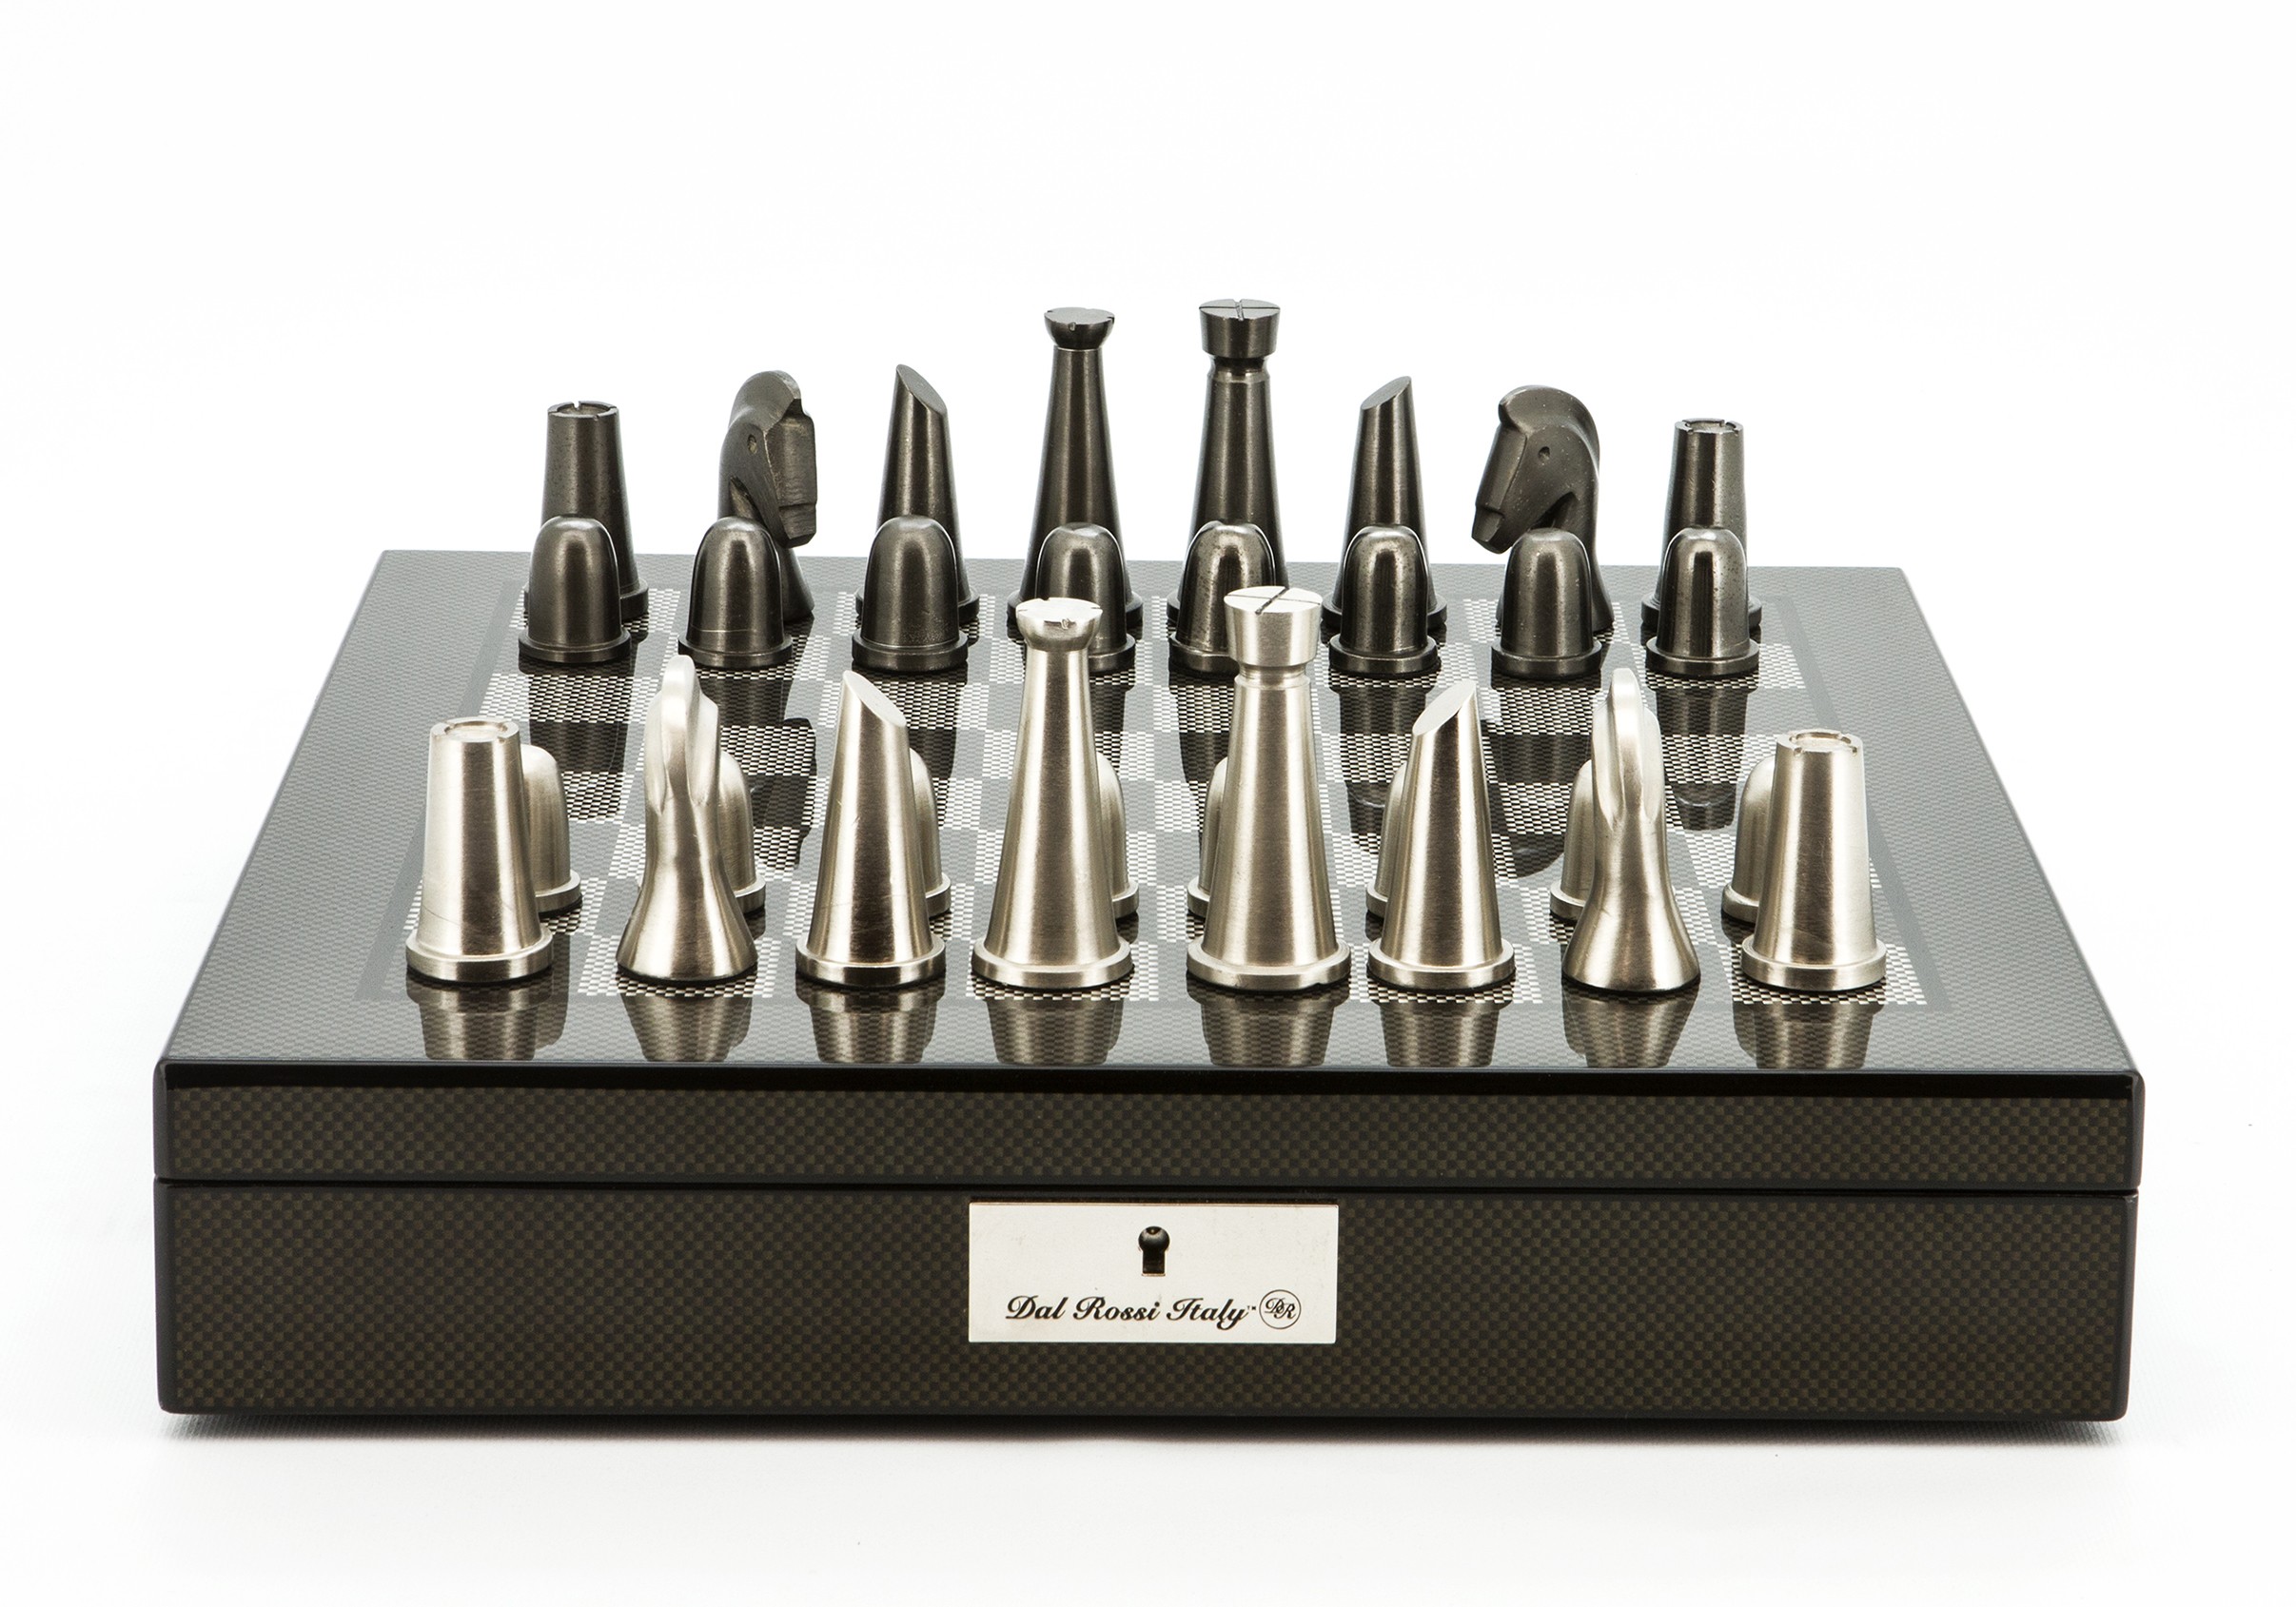 Dal Rossi Italy Chess Set Carbon Fibre Finish 16″ With Compartments, With Metal Dark Titanium and Silver chessmen 85mm